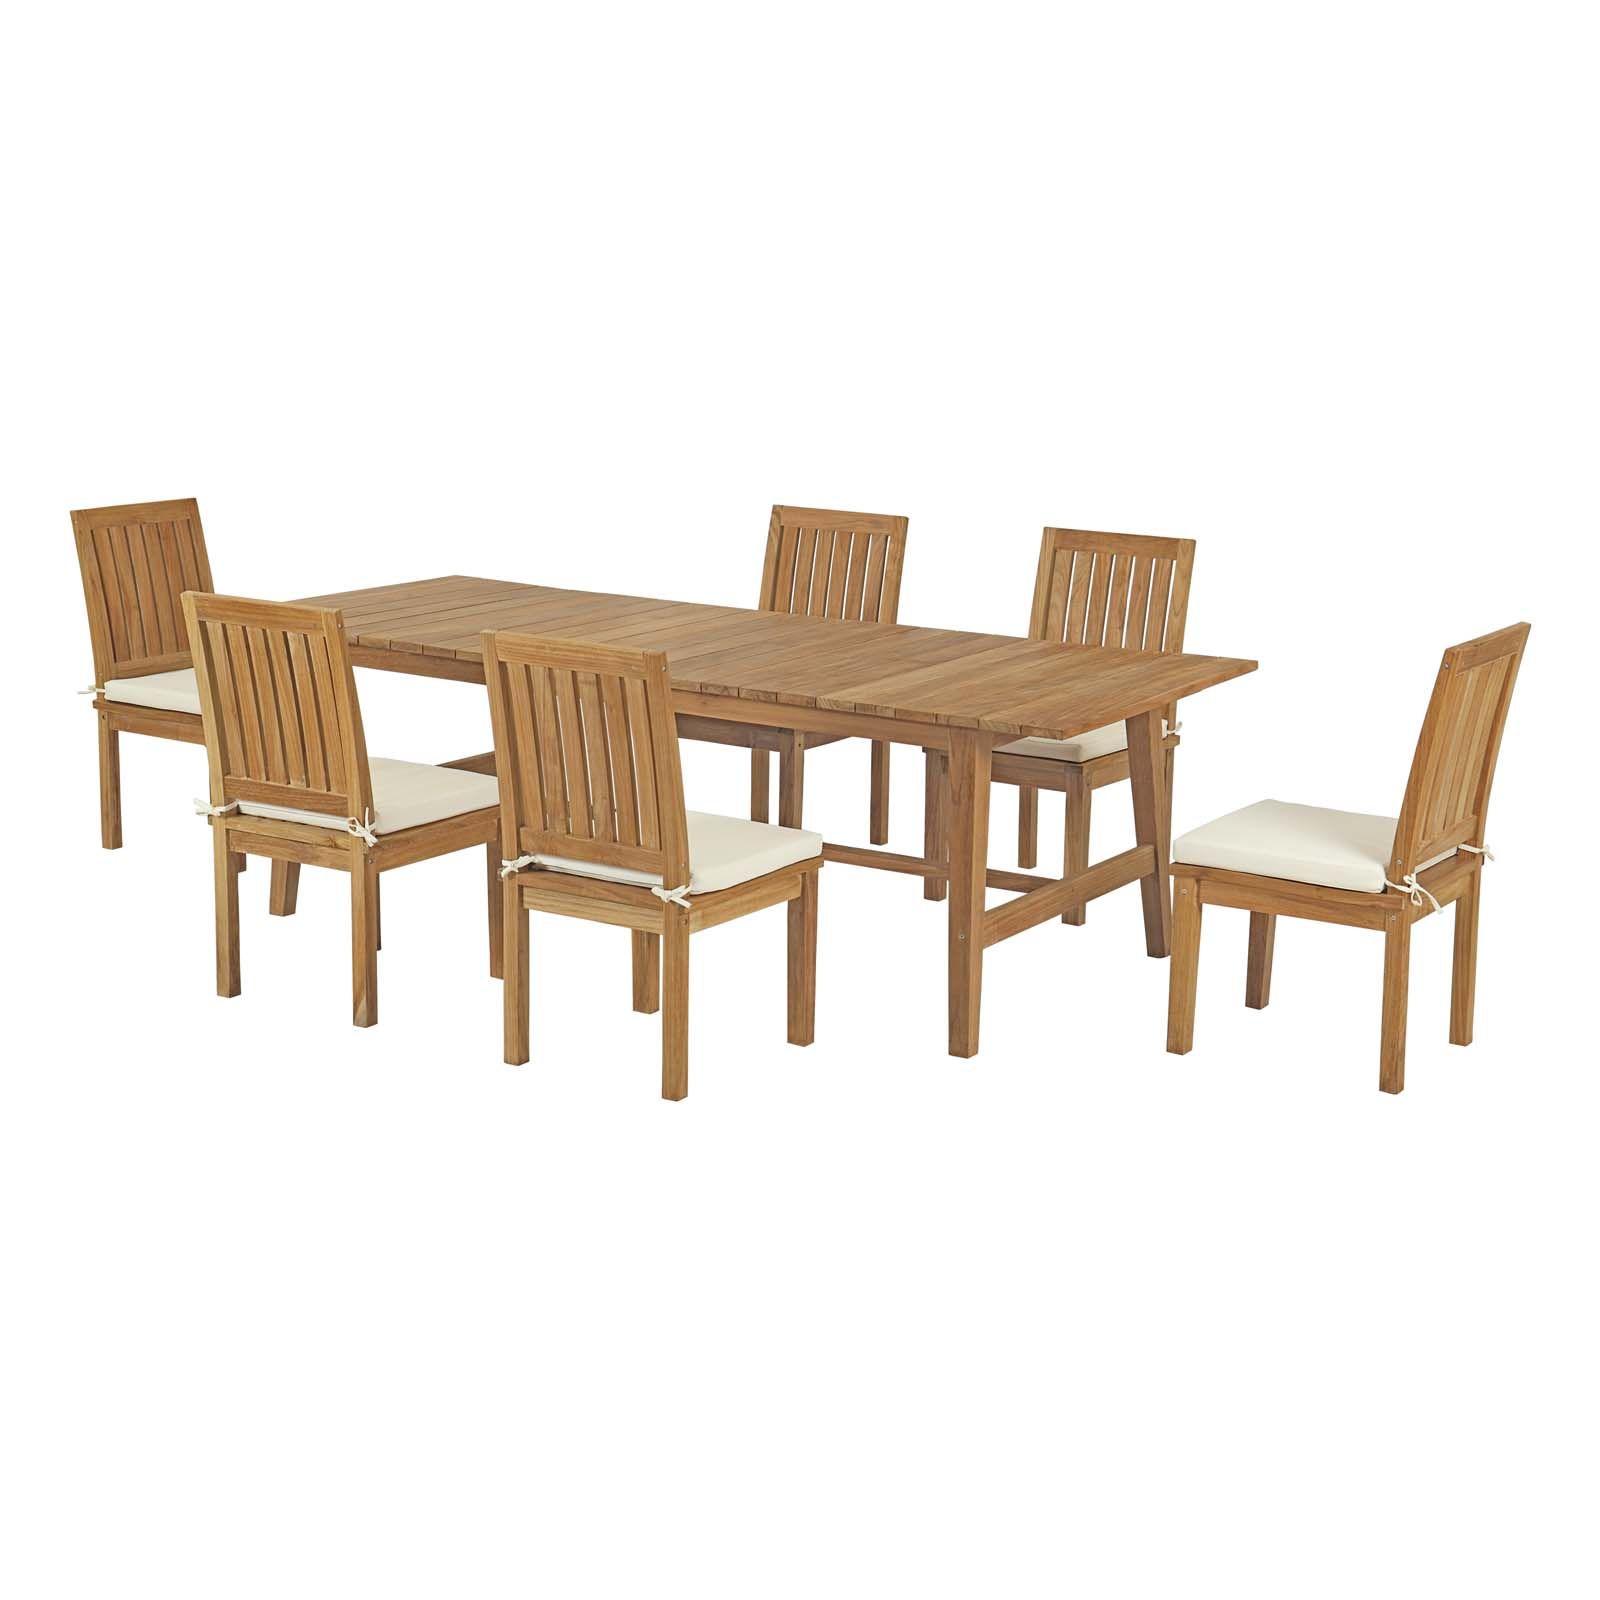 Widely Used 7 Piece Teak Wood Dining Sets For Marina 7 Piece Outdoor Patio Teak Outdoor Dining Set (View 15 of 15)